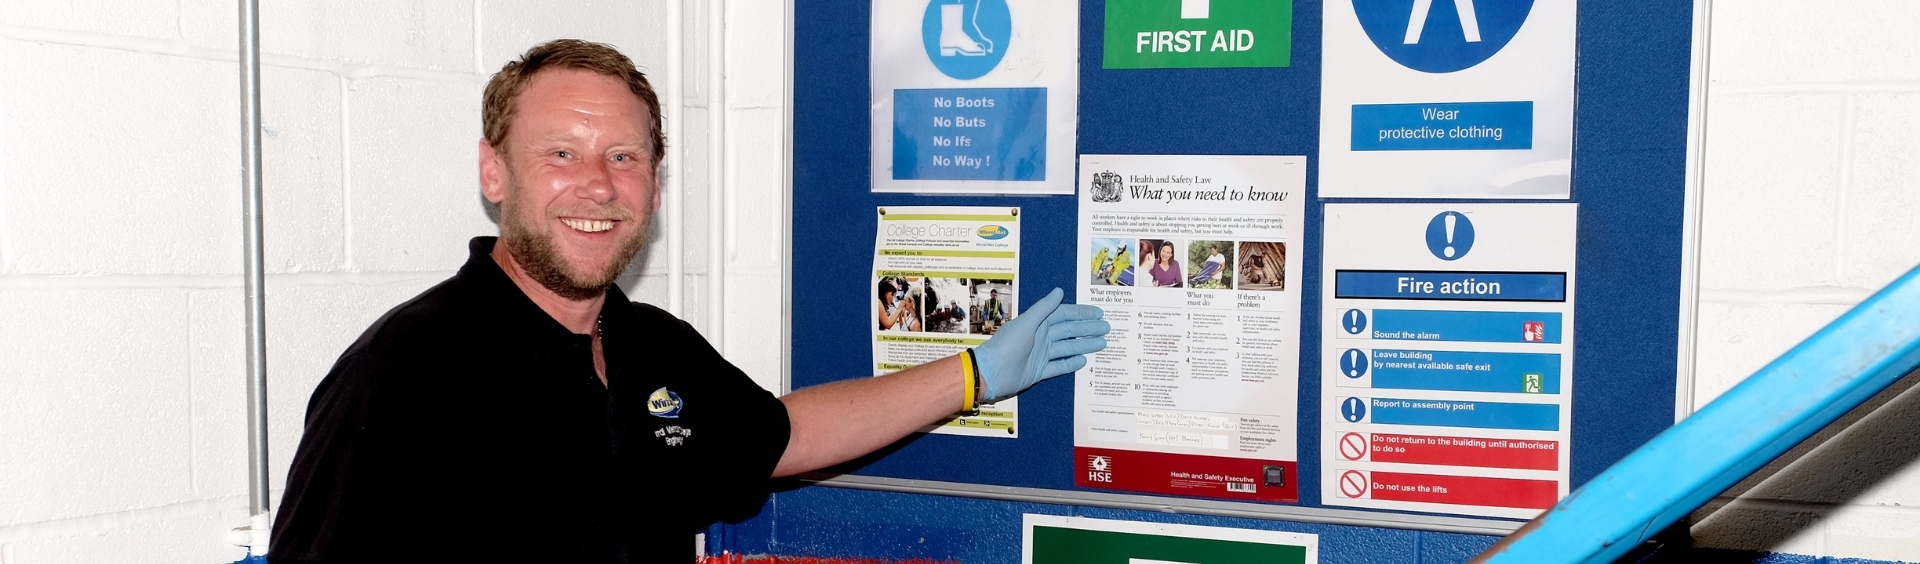 WMC Health and Safety Management in Construction student pointing at noticeboard